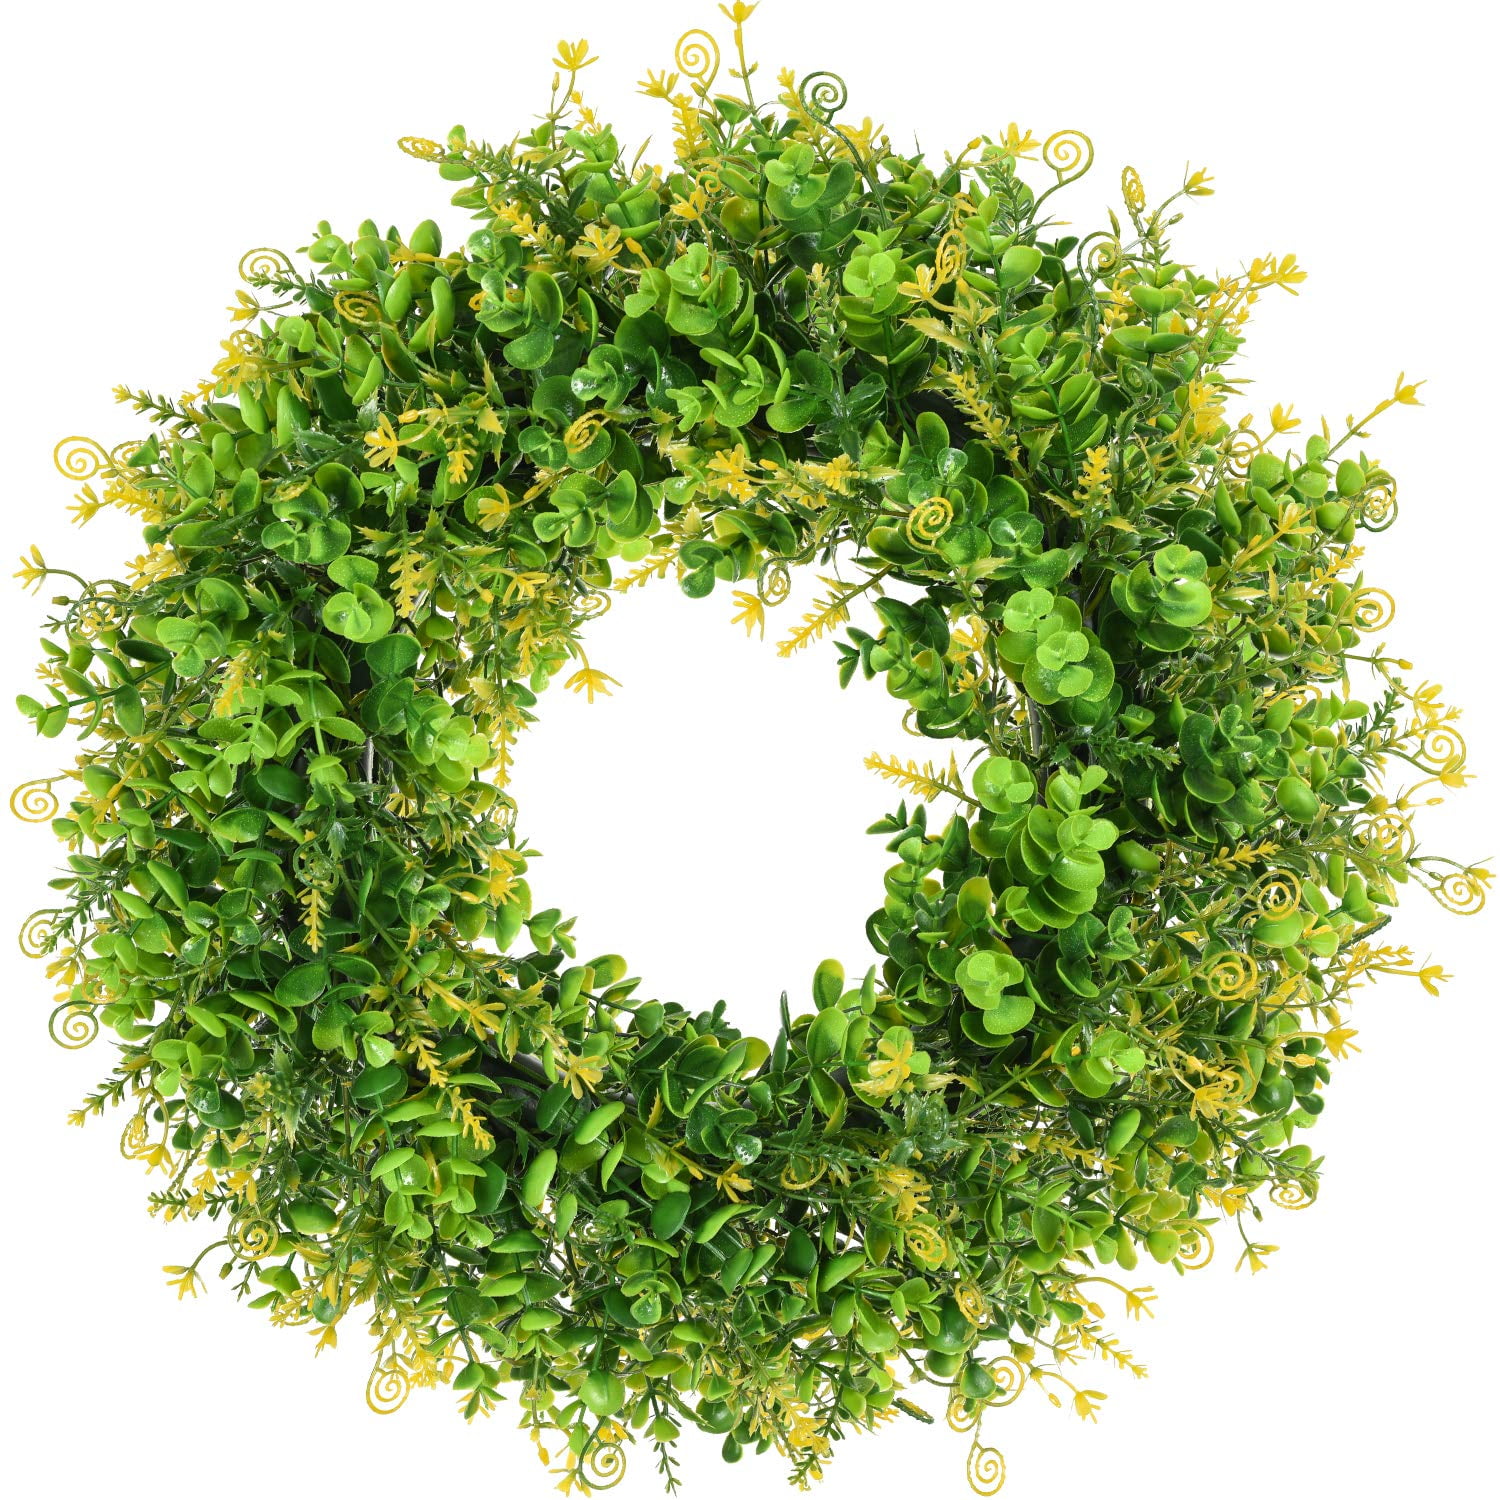 Wreath Material: The Eucalyptus wreaths are made of plastic greenery leaves...